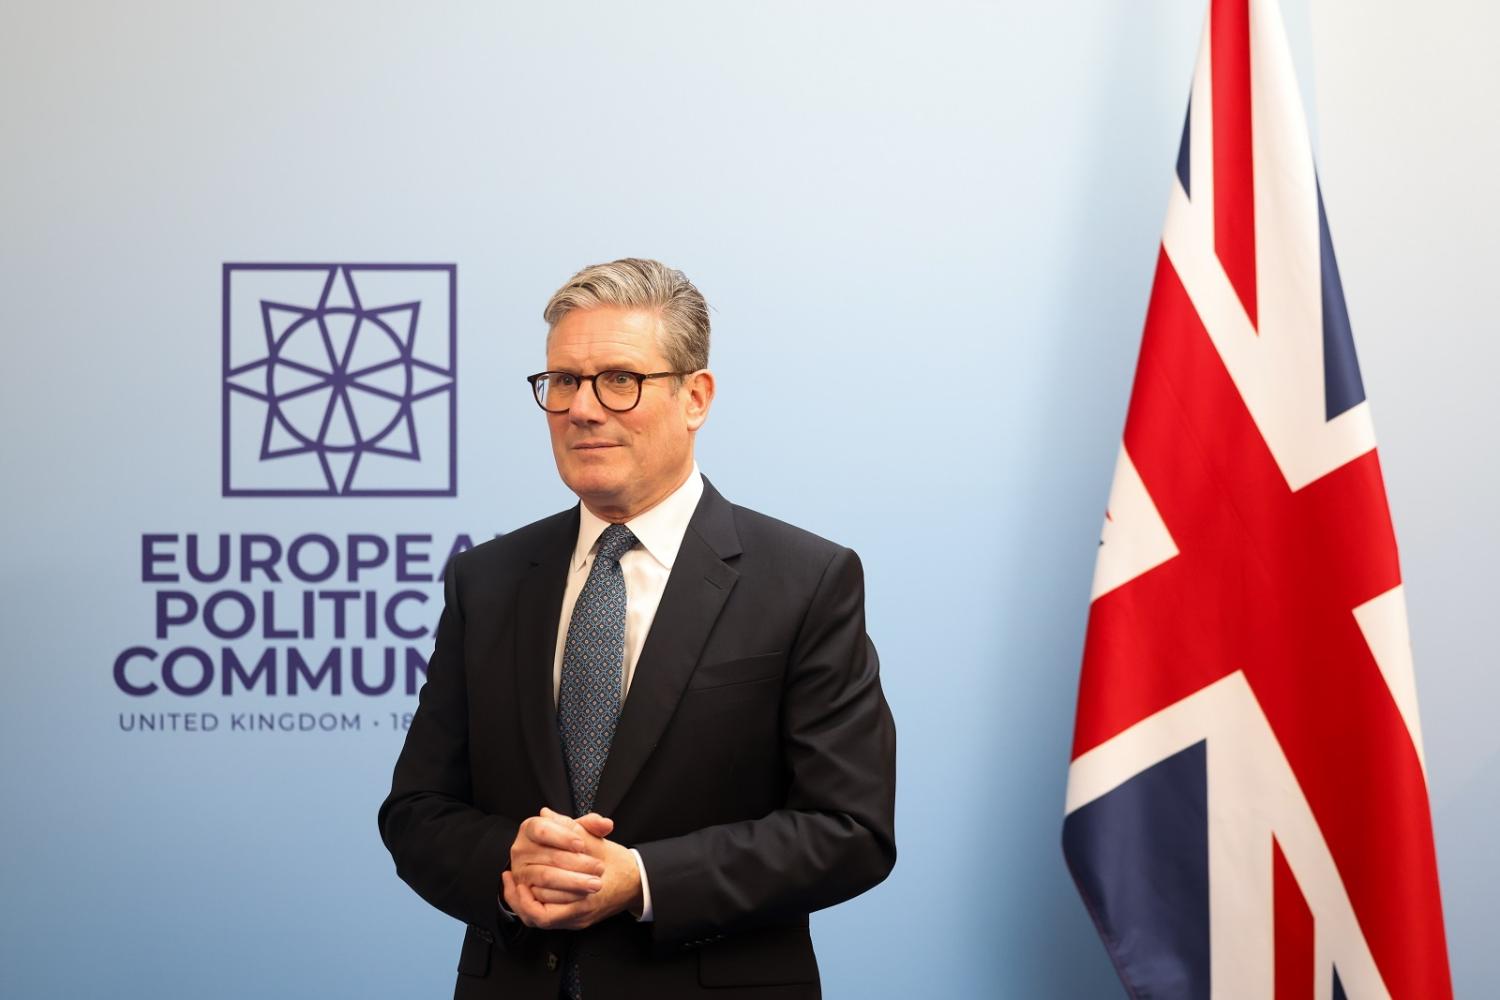 UK Prime Minister Keir Starmer at the European Political Community meeting at Blenheim Palace near Oxford, UK, on 18 July 2024 (Chris Ratcliffe/Bloomberg via Getty Images)